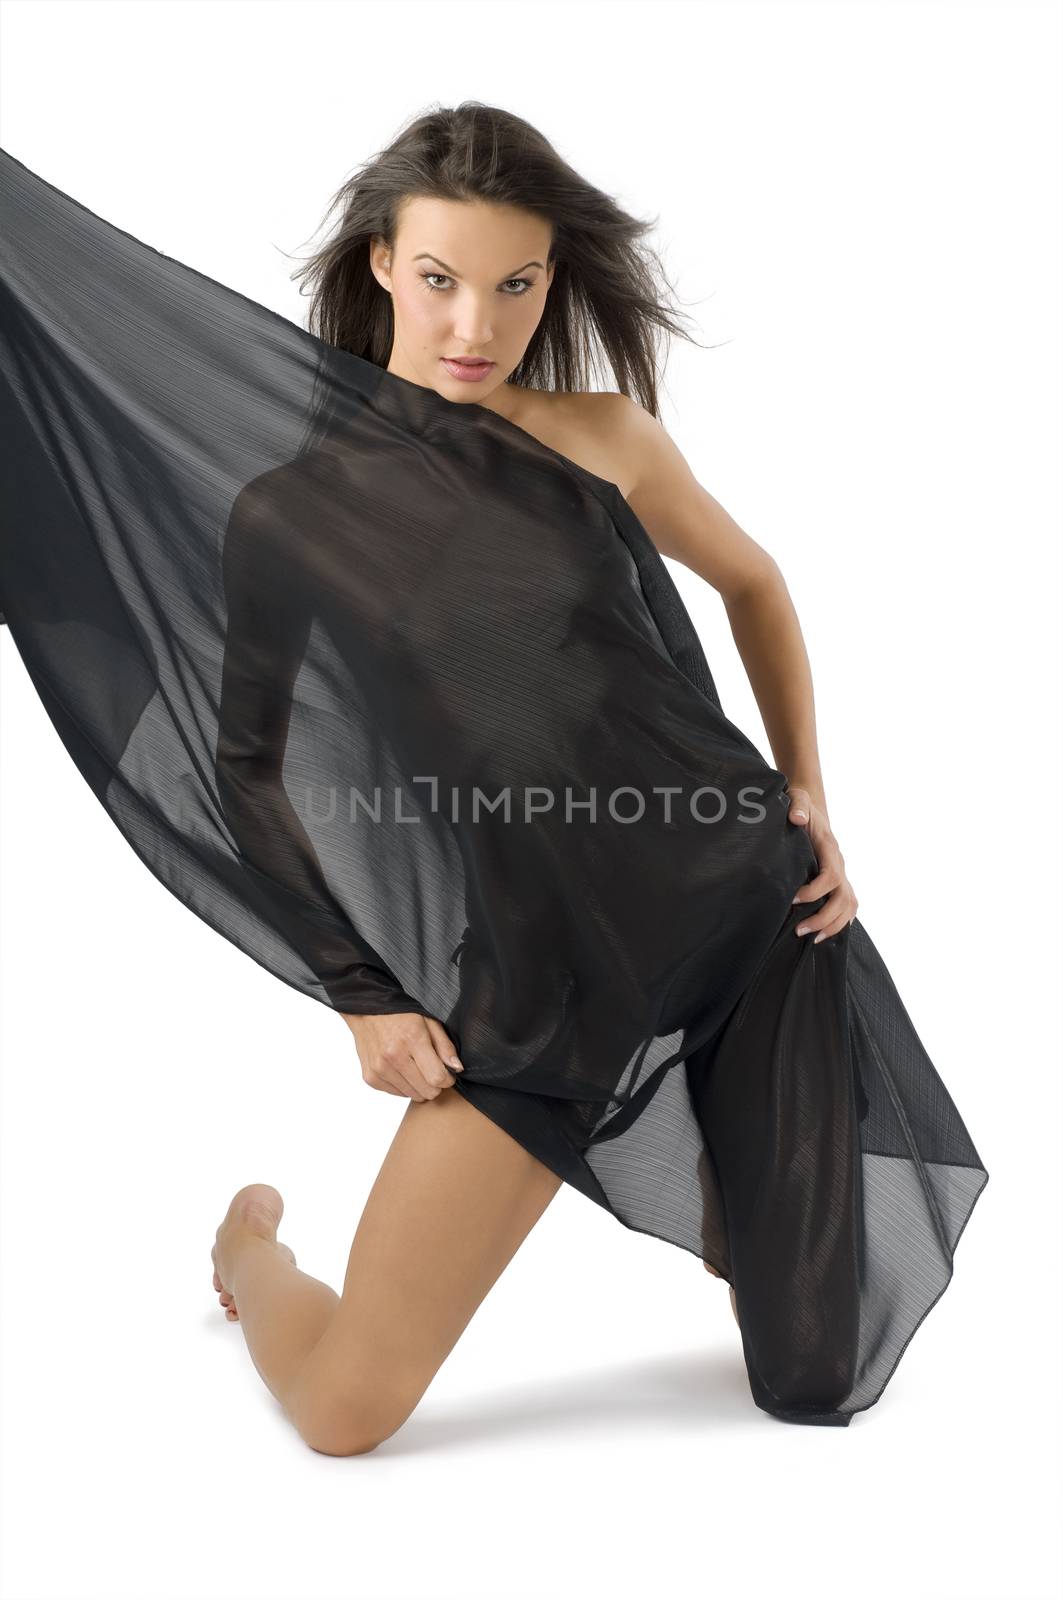 nice young woman covering her body with black fabric and wind in hair